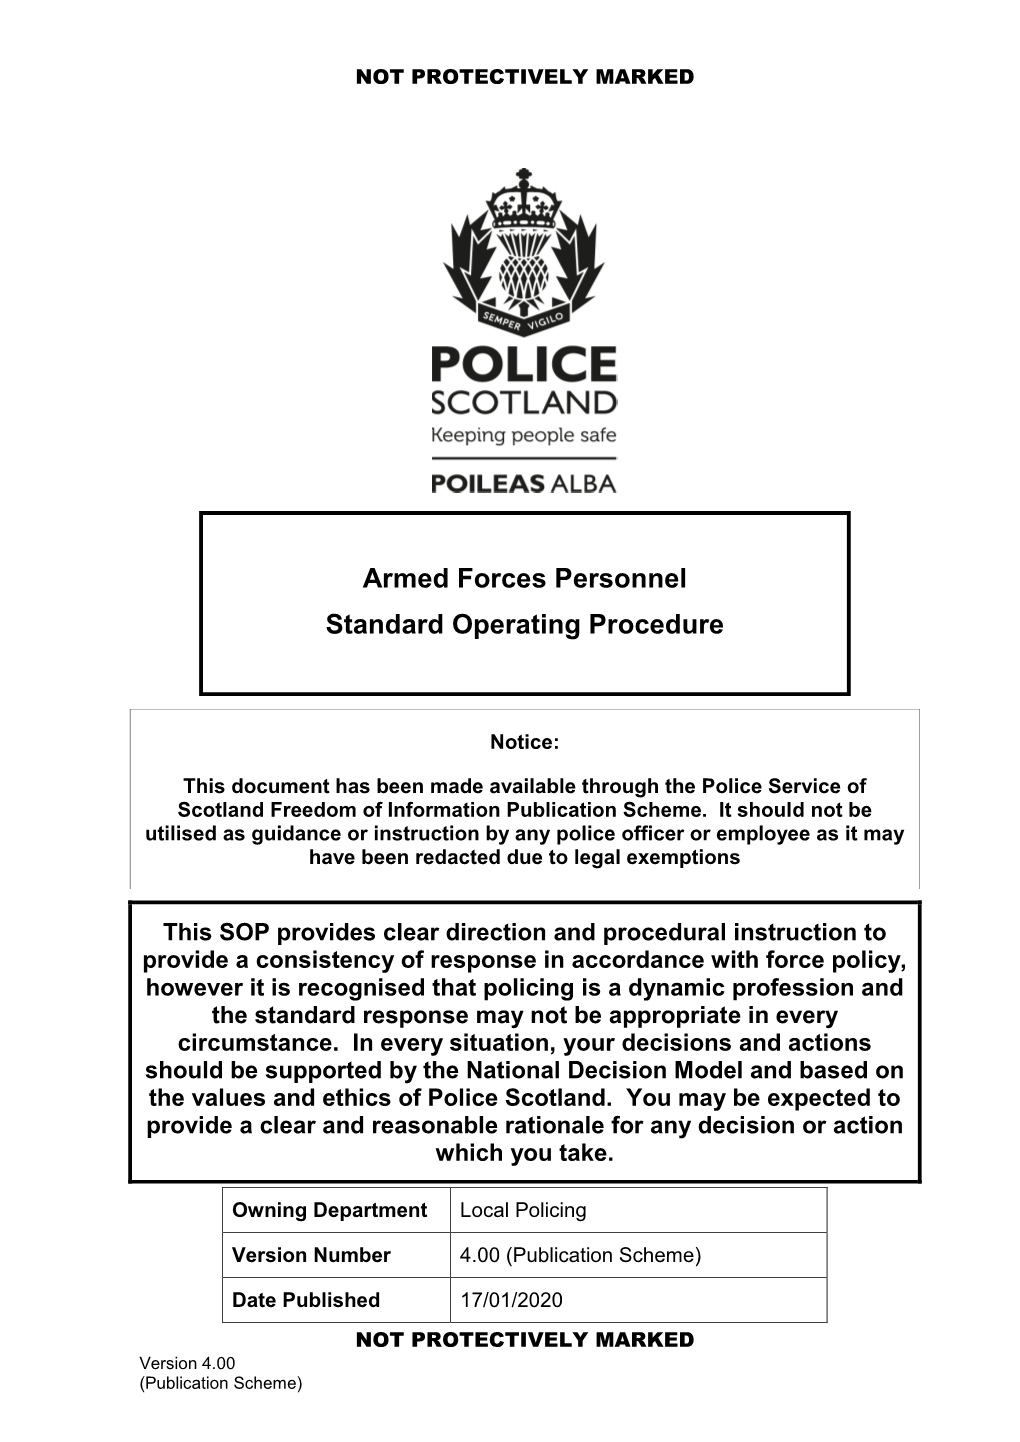 Armed Forces Personnel Standard Operating Procedure